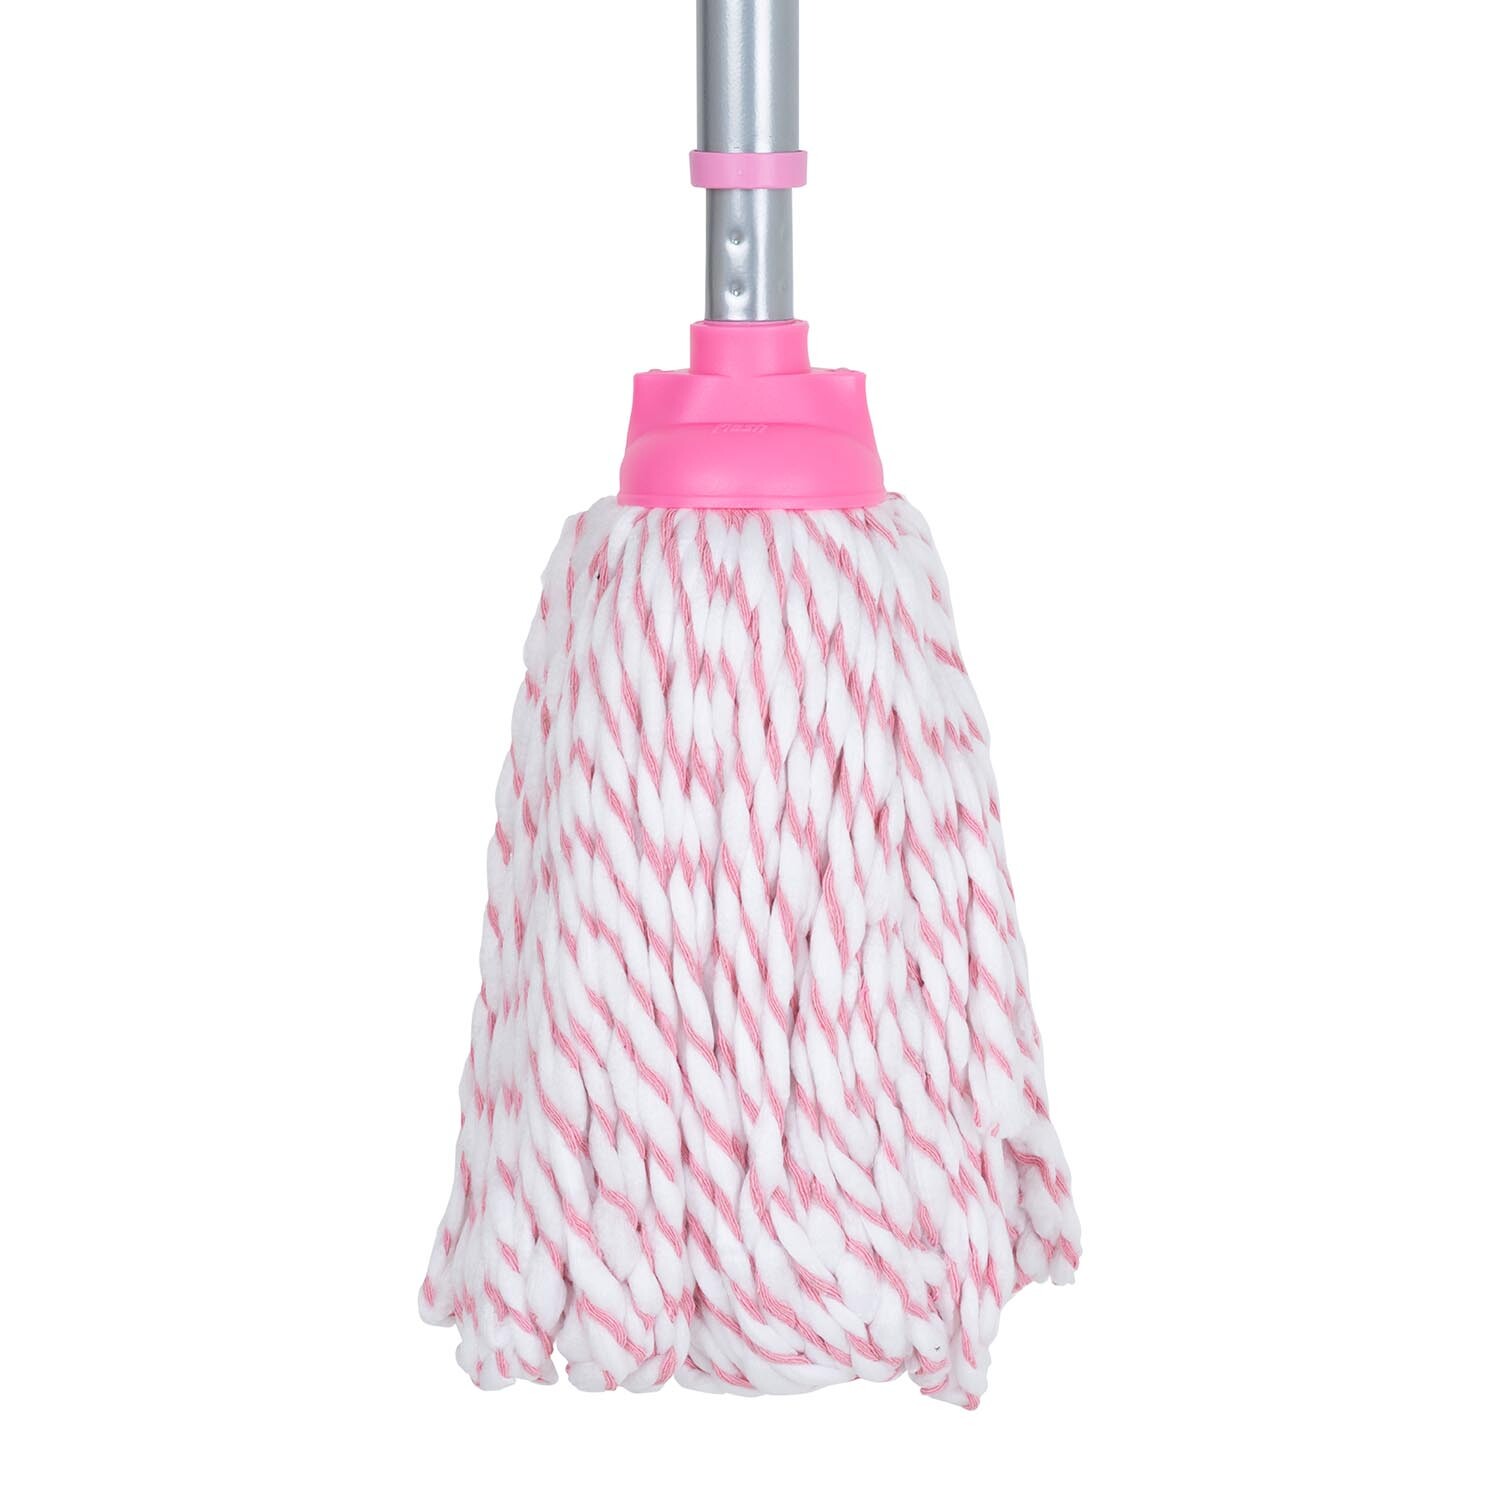 Flash Duo Mop with Extending Handle - Pink Image 2